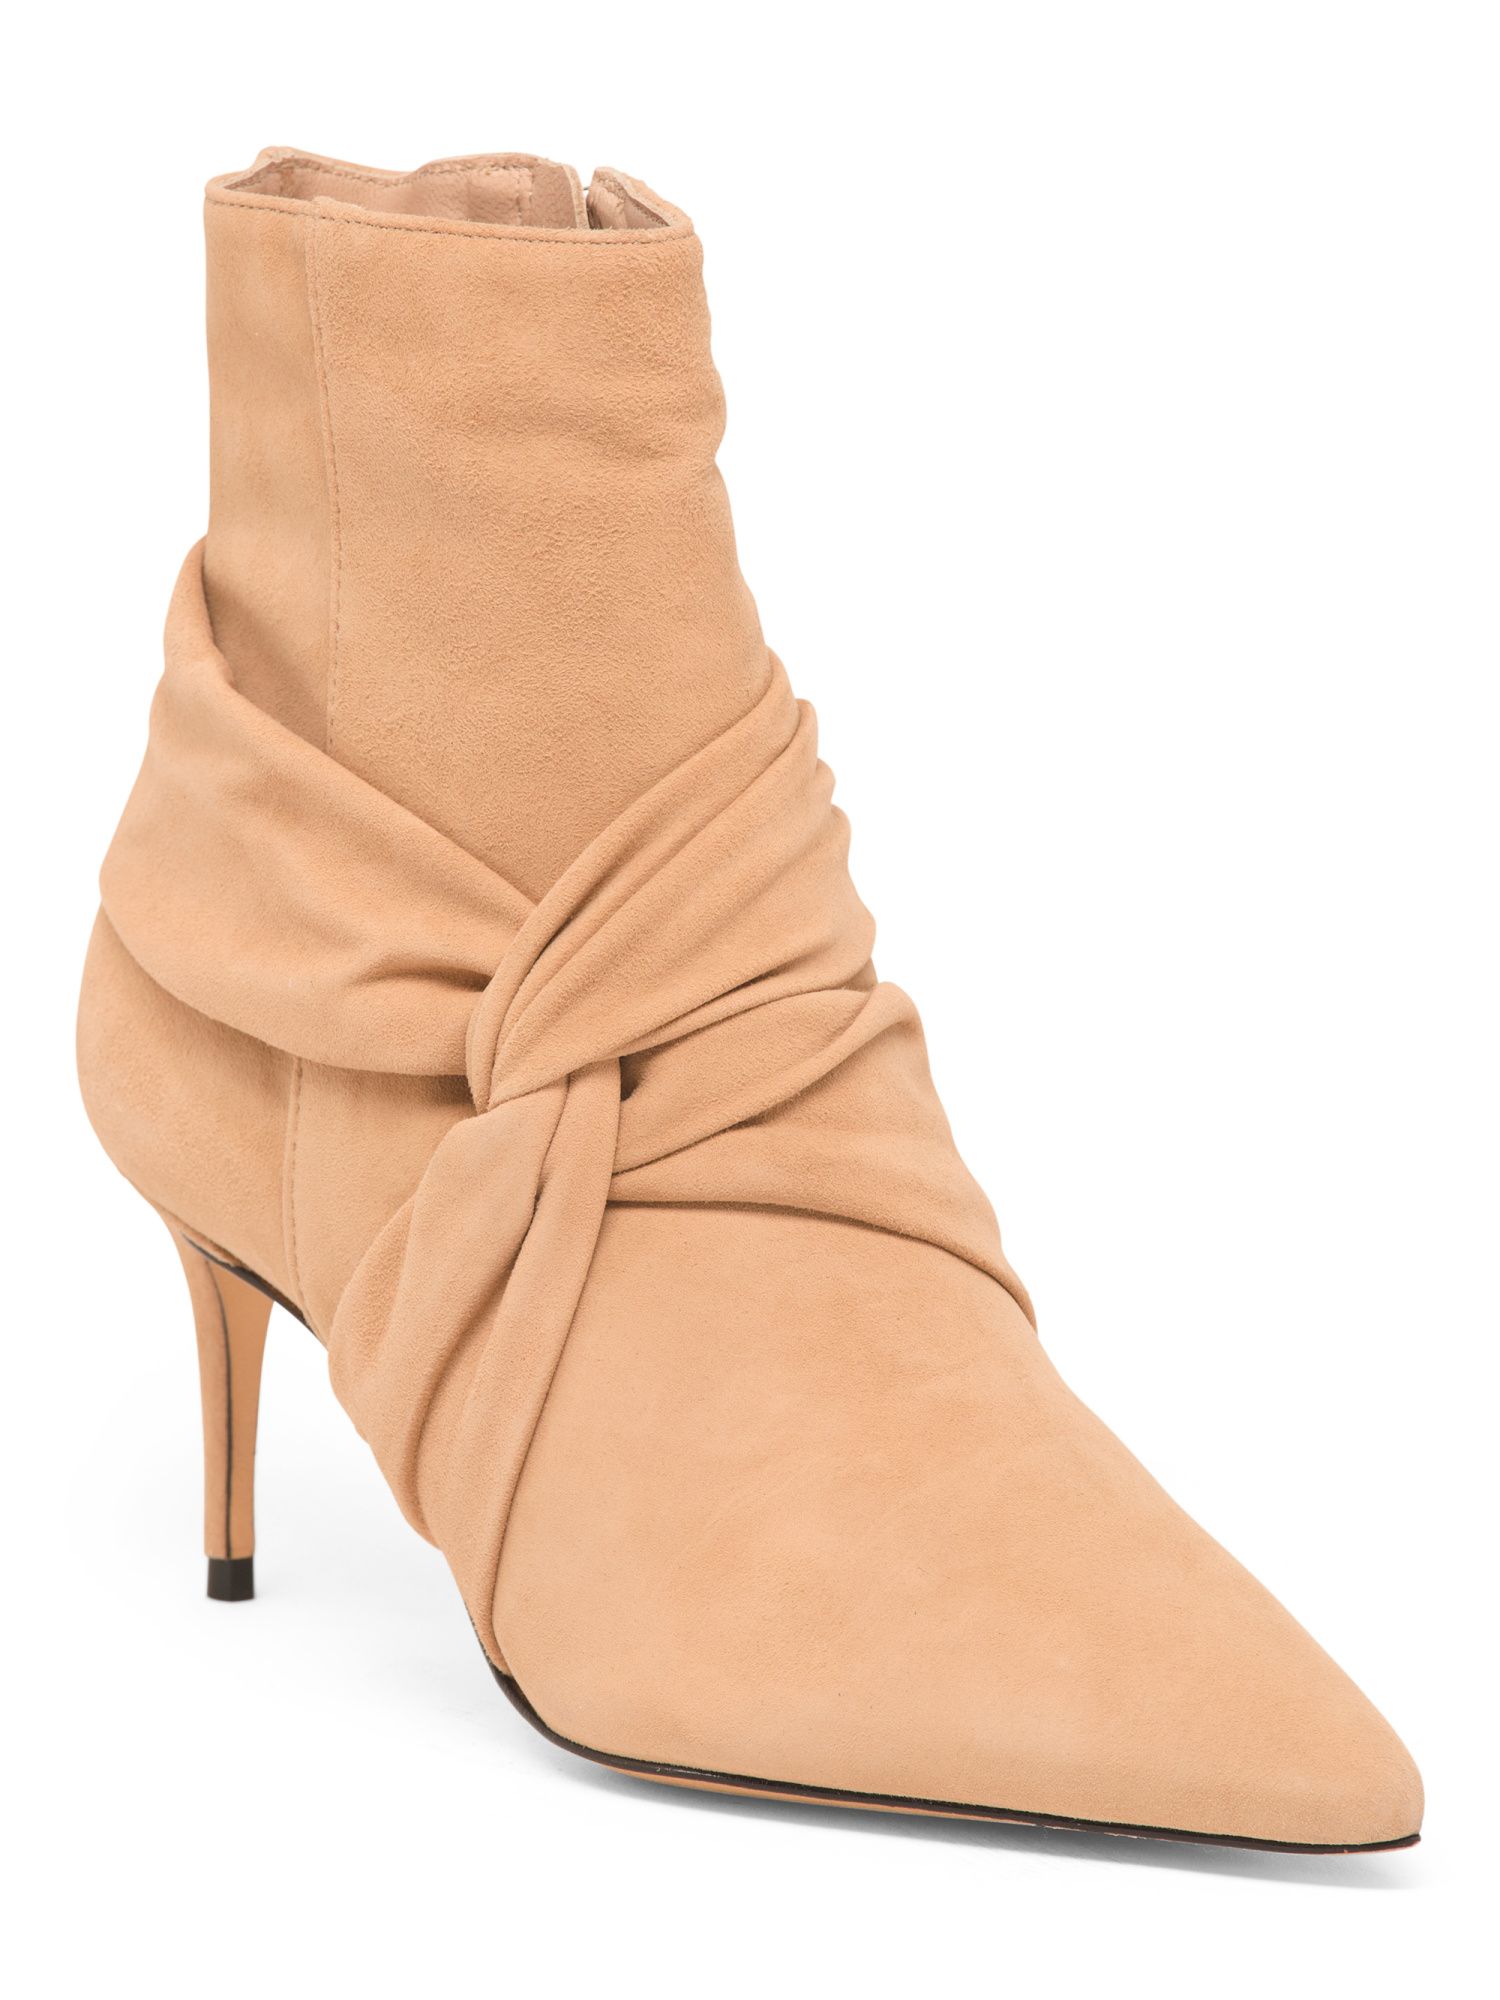 Made In Brazil Pointy Toe Suede Ankle Booties | TJ Maxx